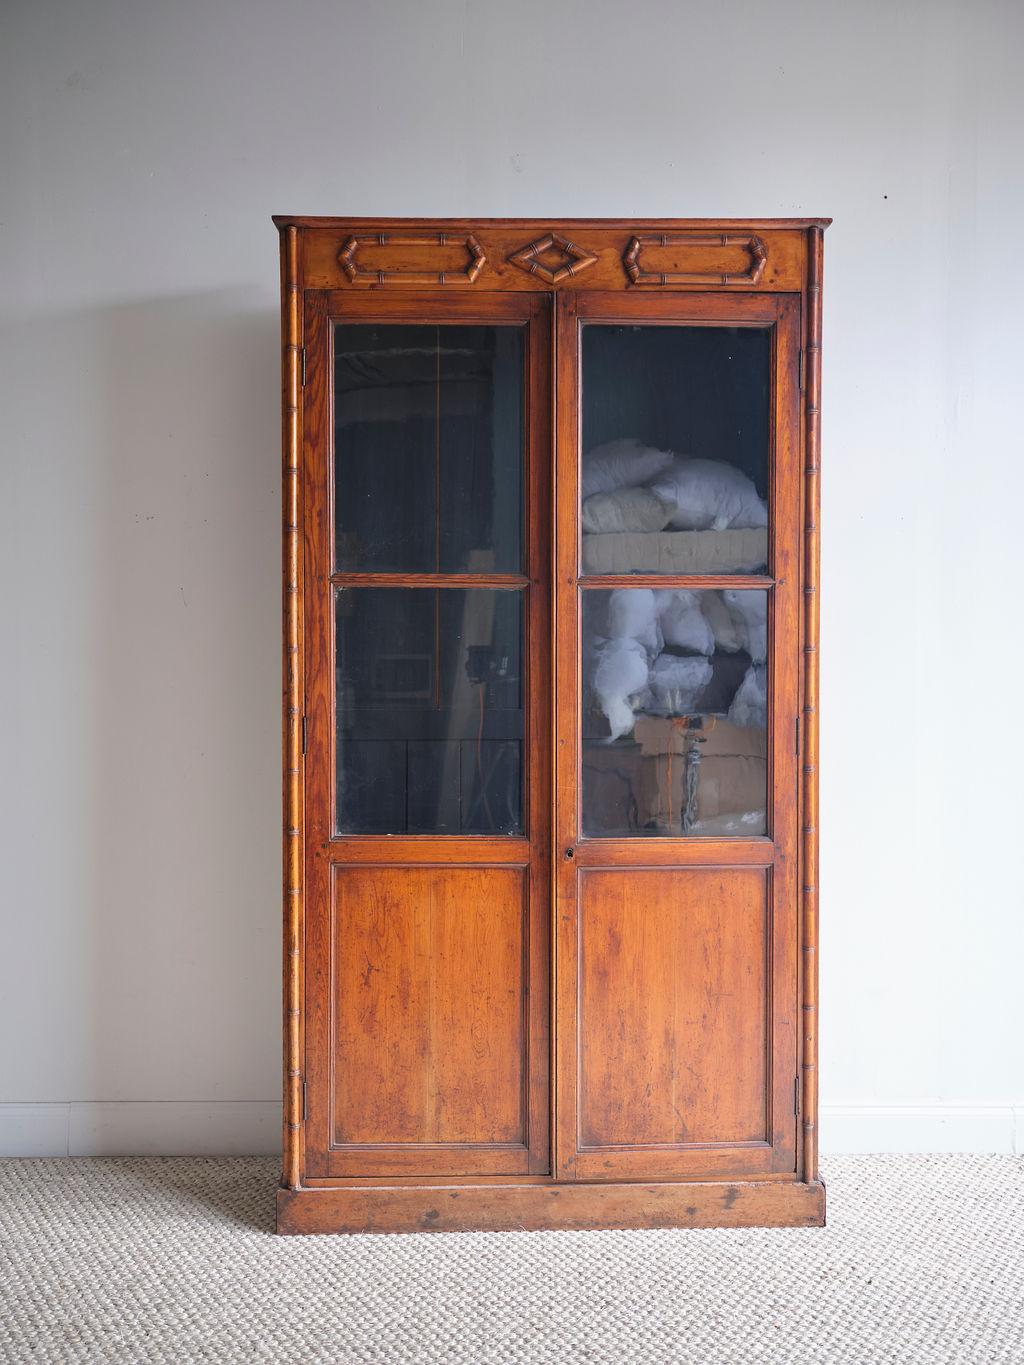 This bamboo glazed cabinet features a lovely warm patina and bamboo features along the sides of the piece as well as across the top. The four window panes are original and in great shape. The cabinet opens up to four interior shelves that are each 9